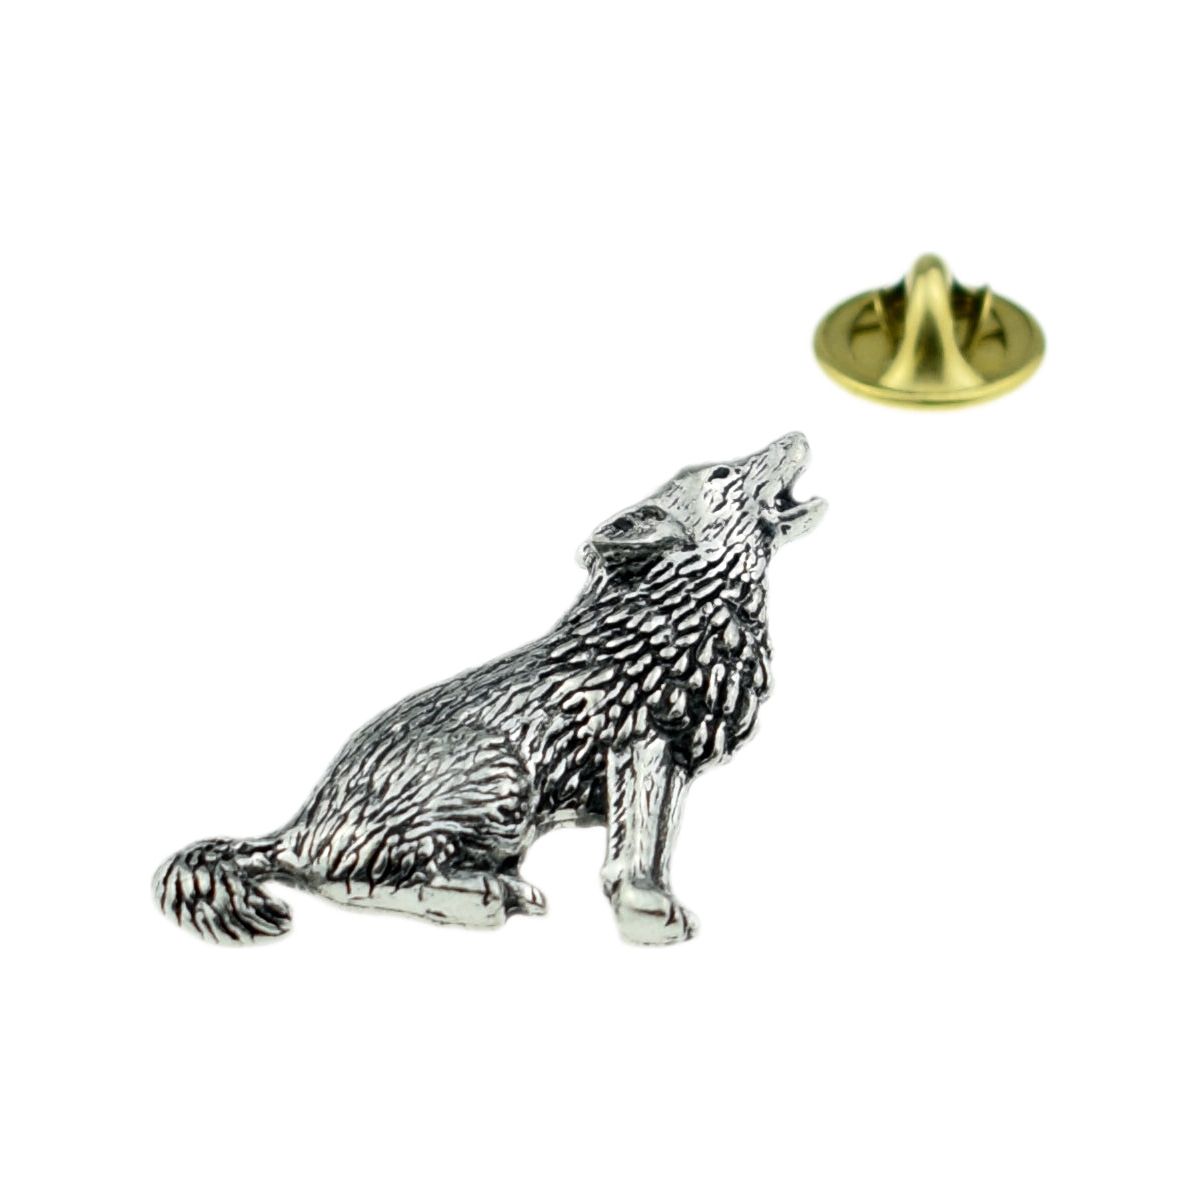 Howling Wolf Pewter Lapel Pin Badge - Ashton and Finch